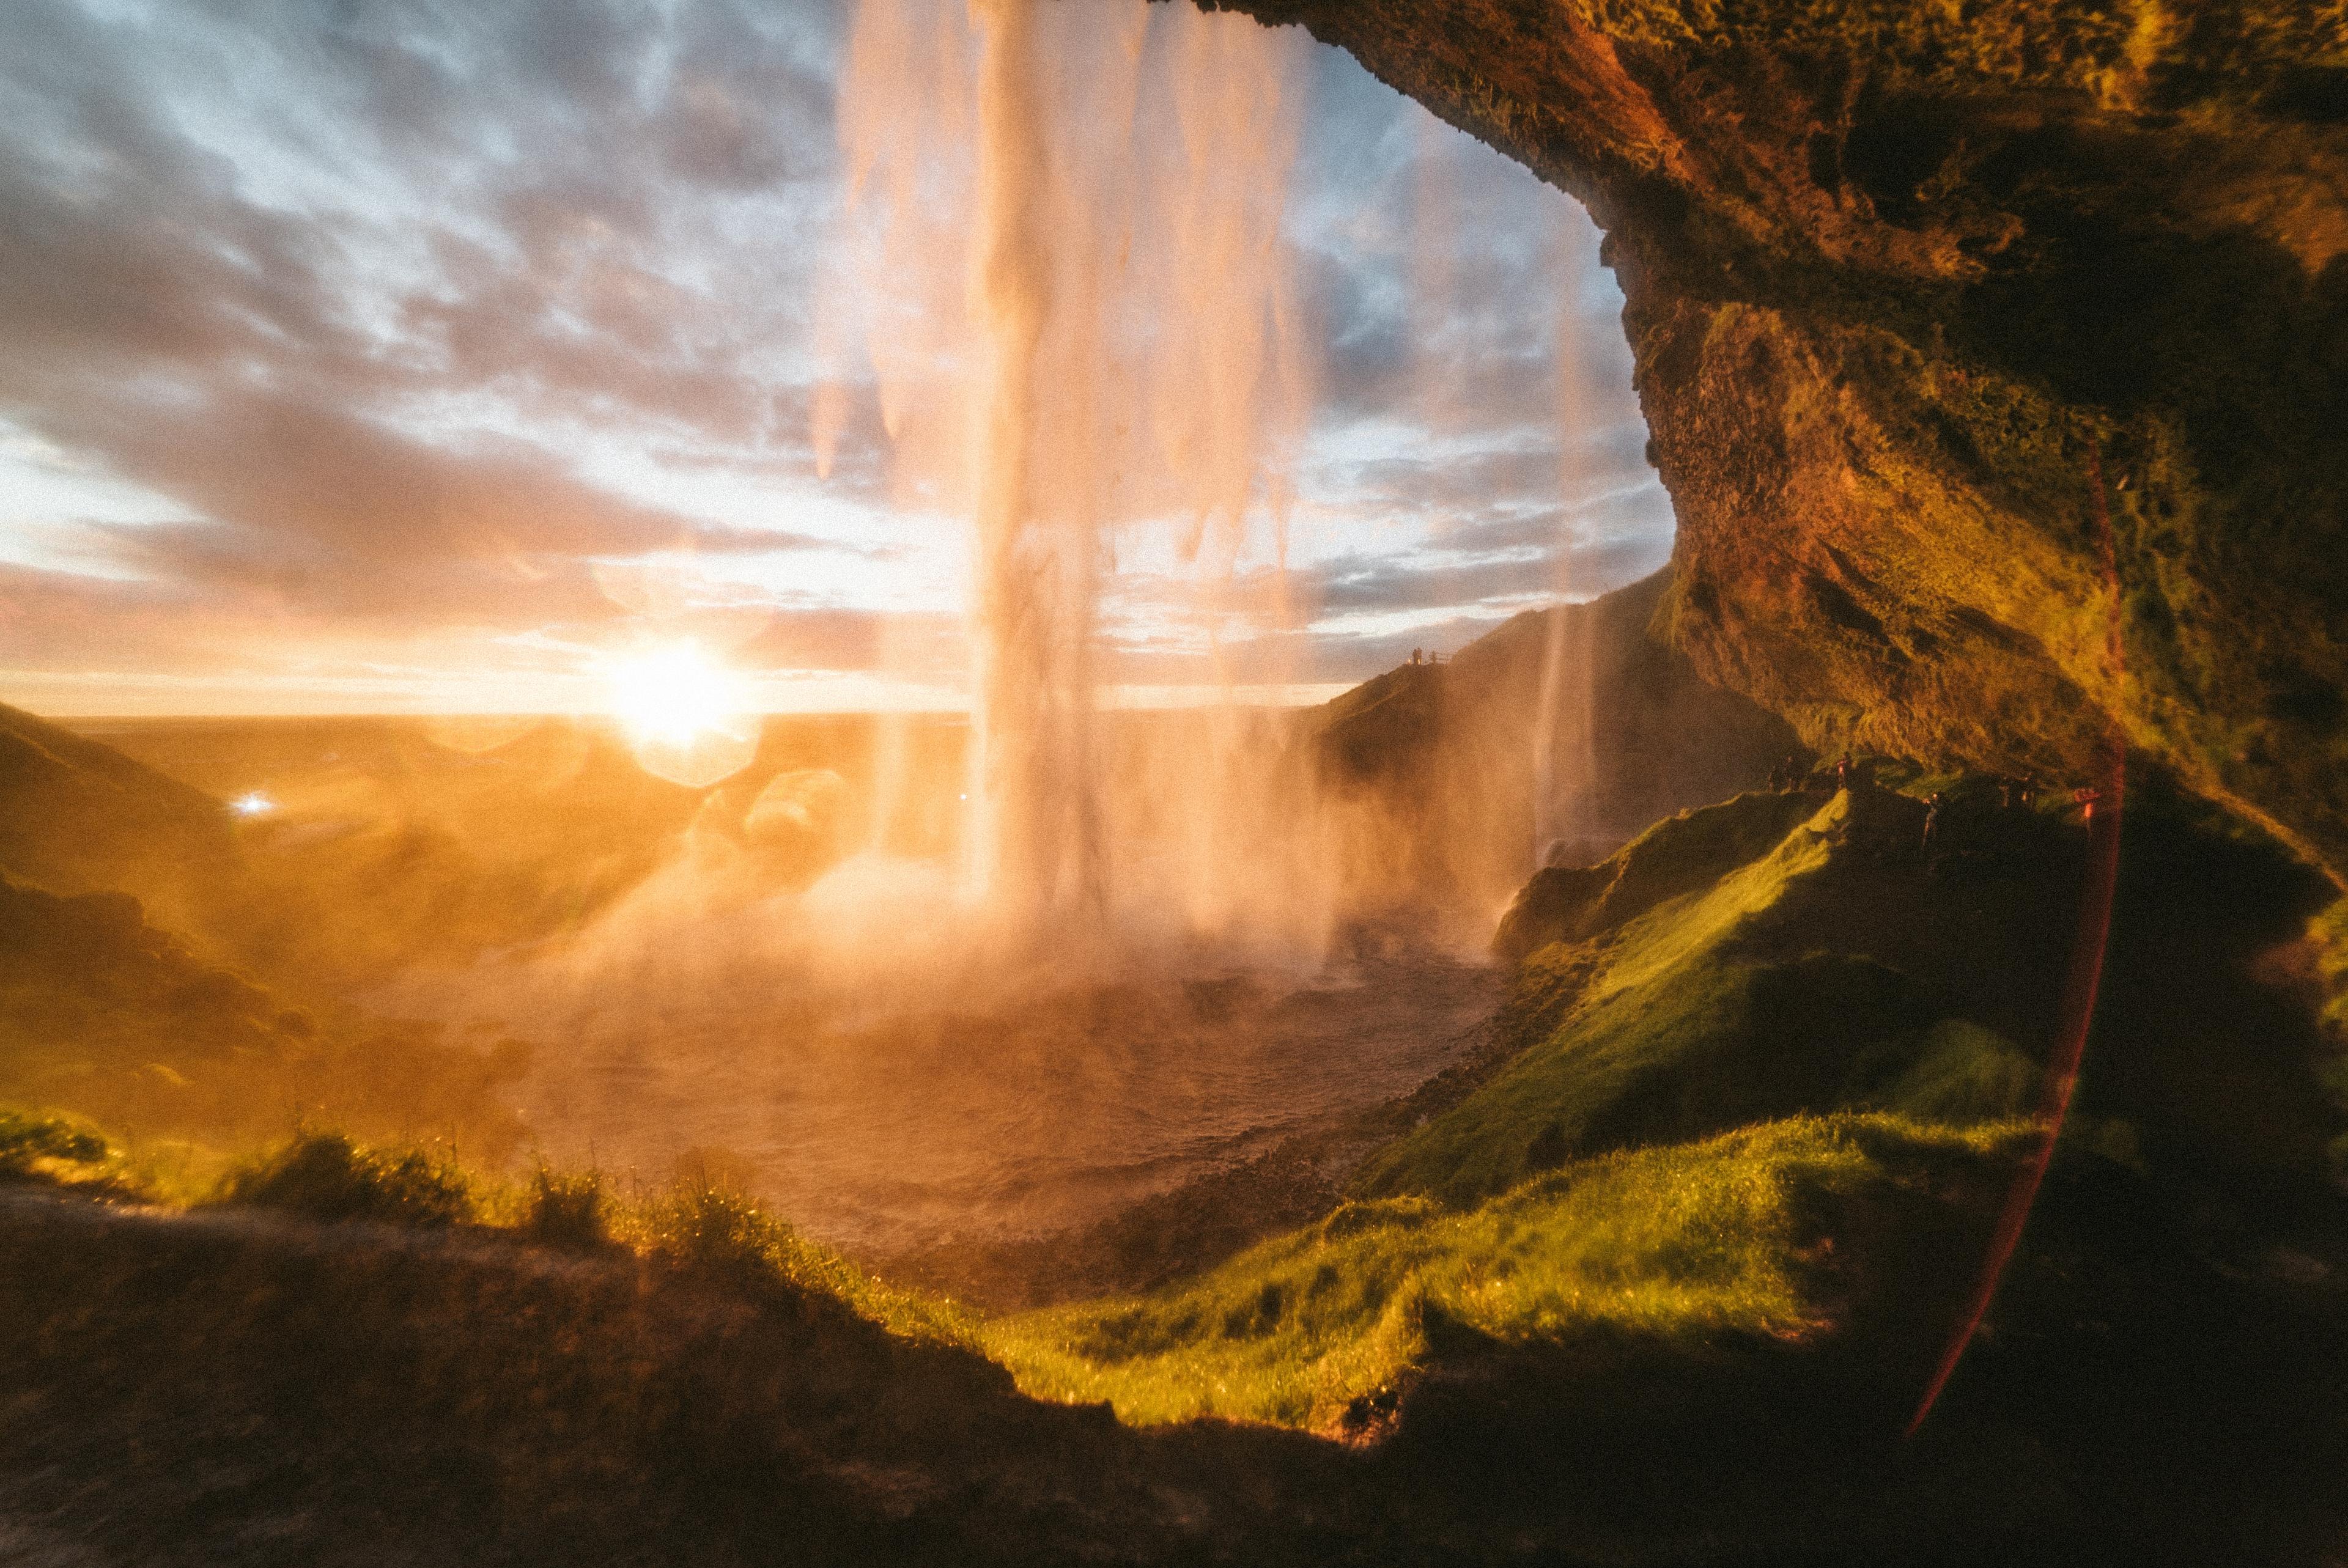 Sunset view from behind a cascading waterfall with rays of sunlight piercing through the mist and illuminating the rocky landscape.